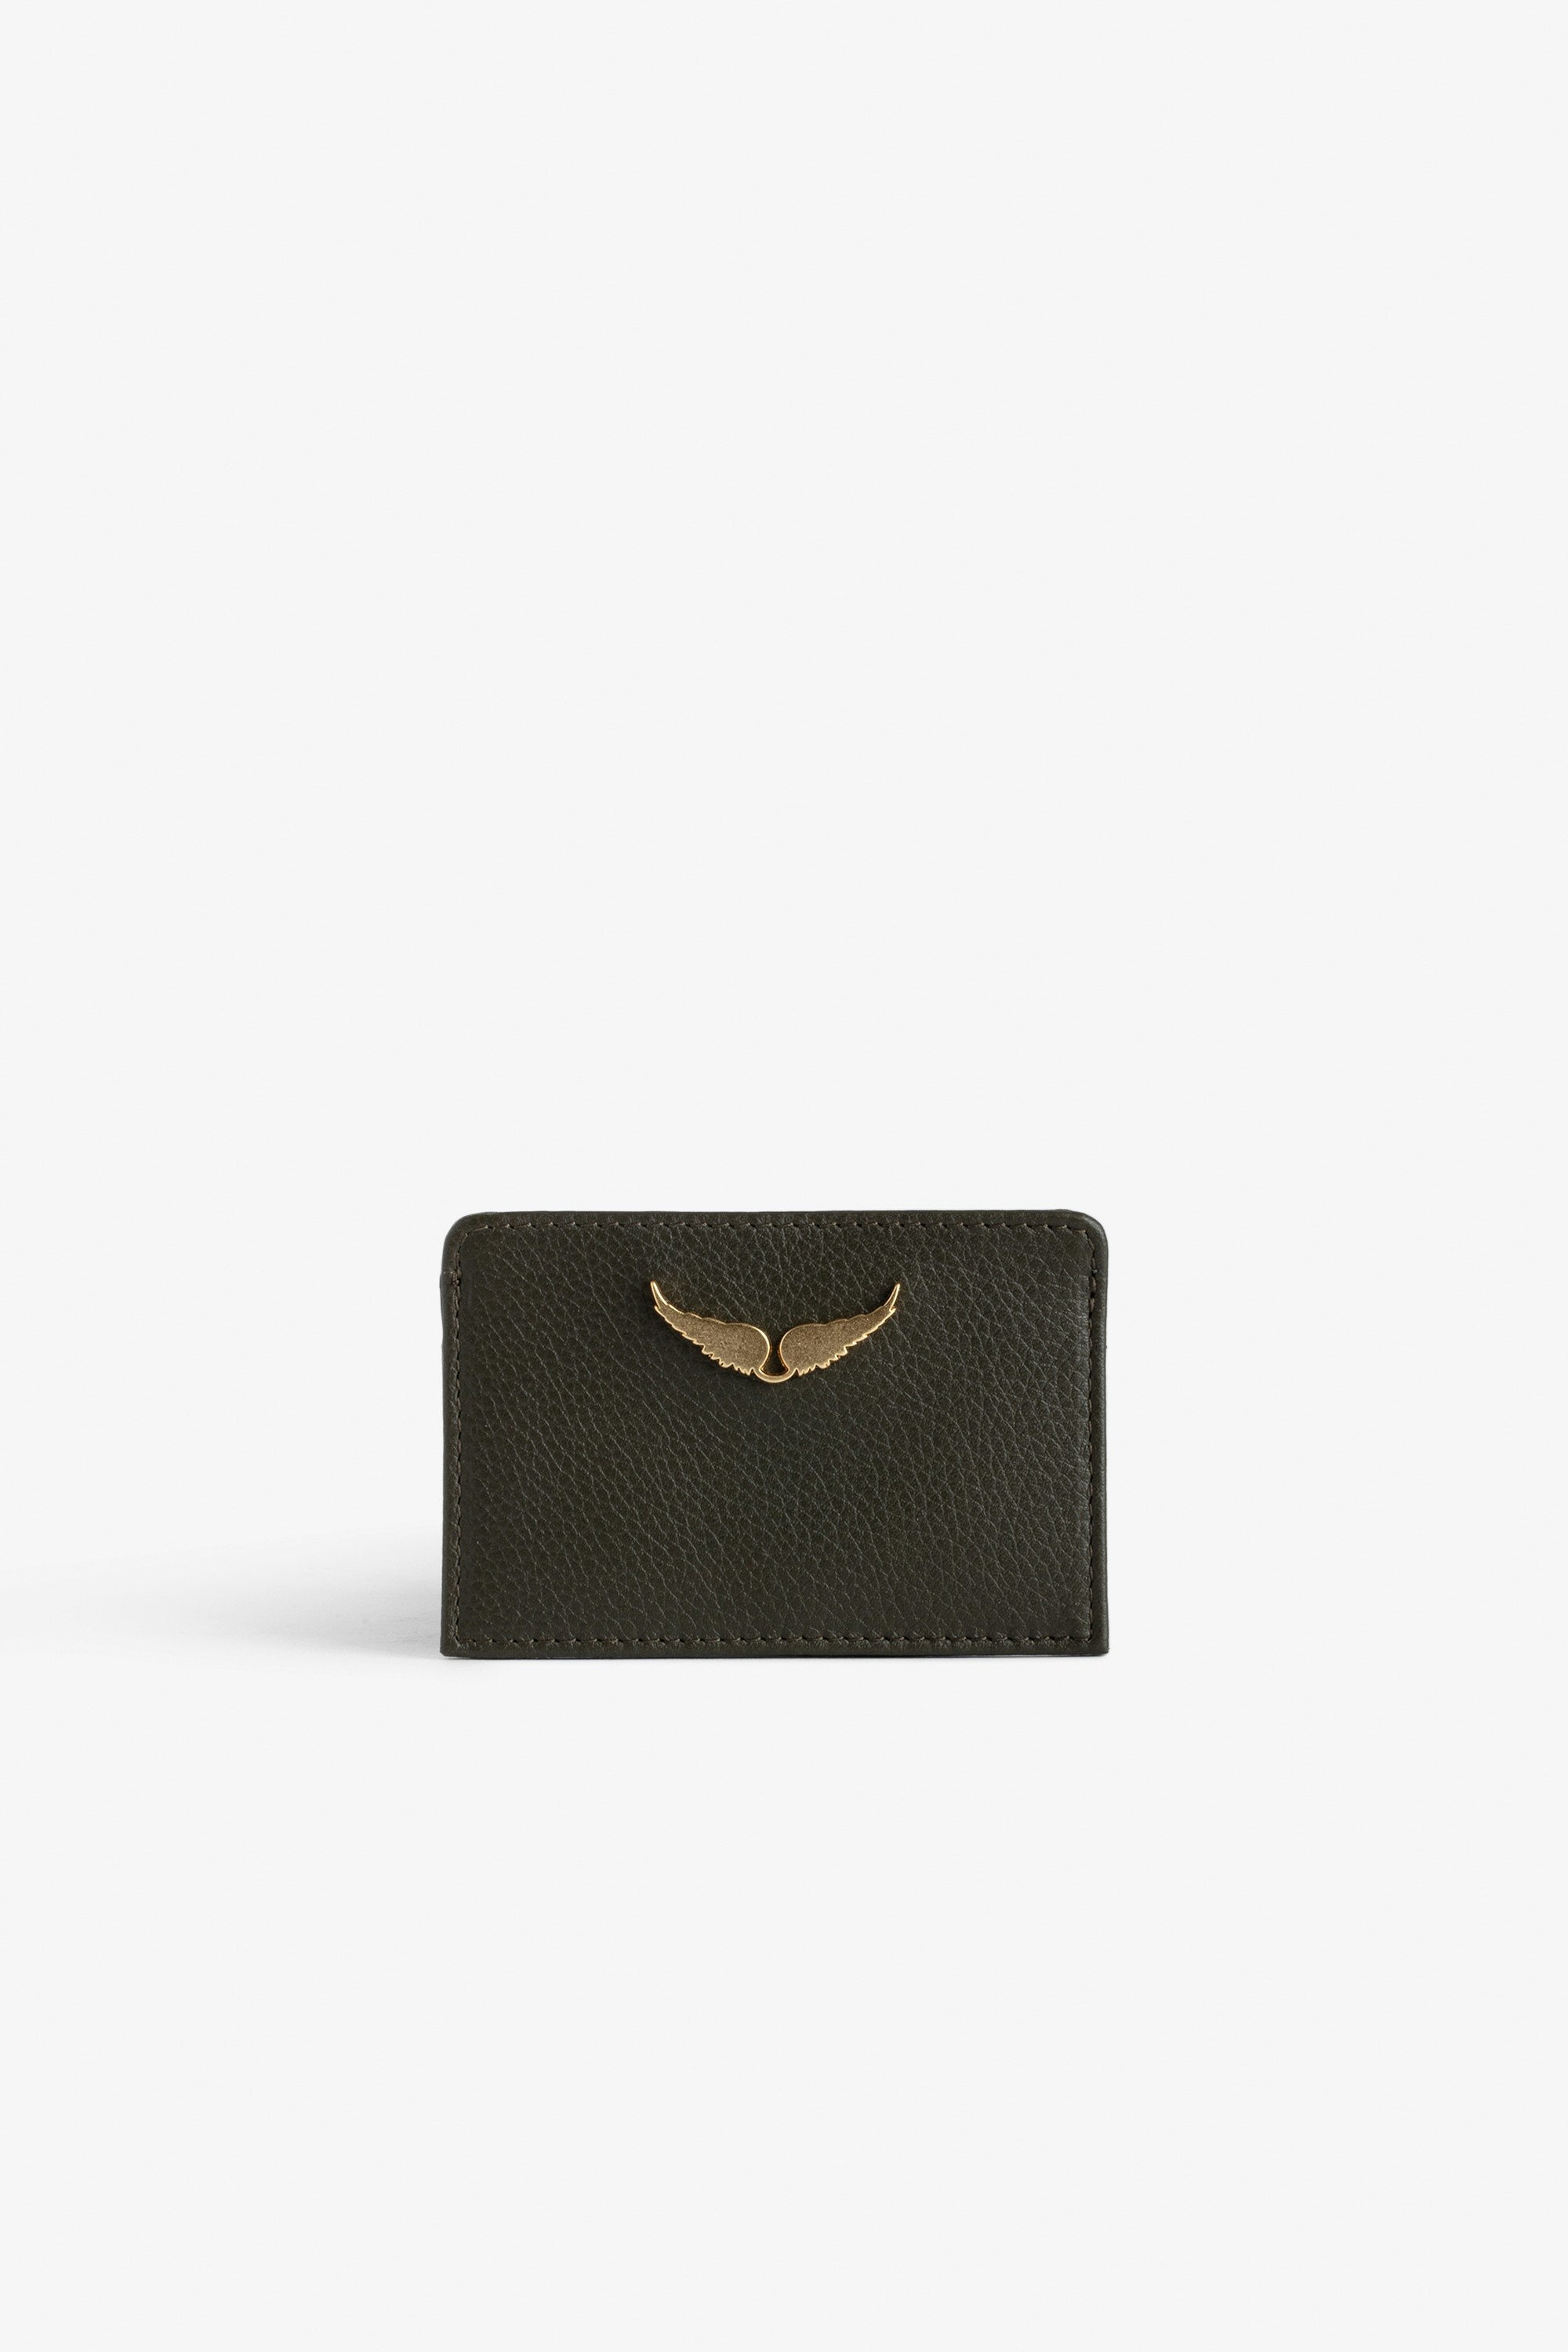 ZV Pass カードホルダー Women’s khaki grained leather card holder with gold-tone wings charm.